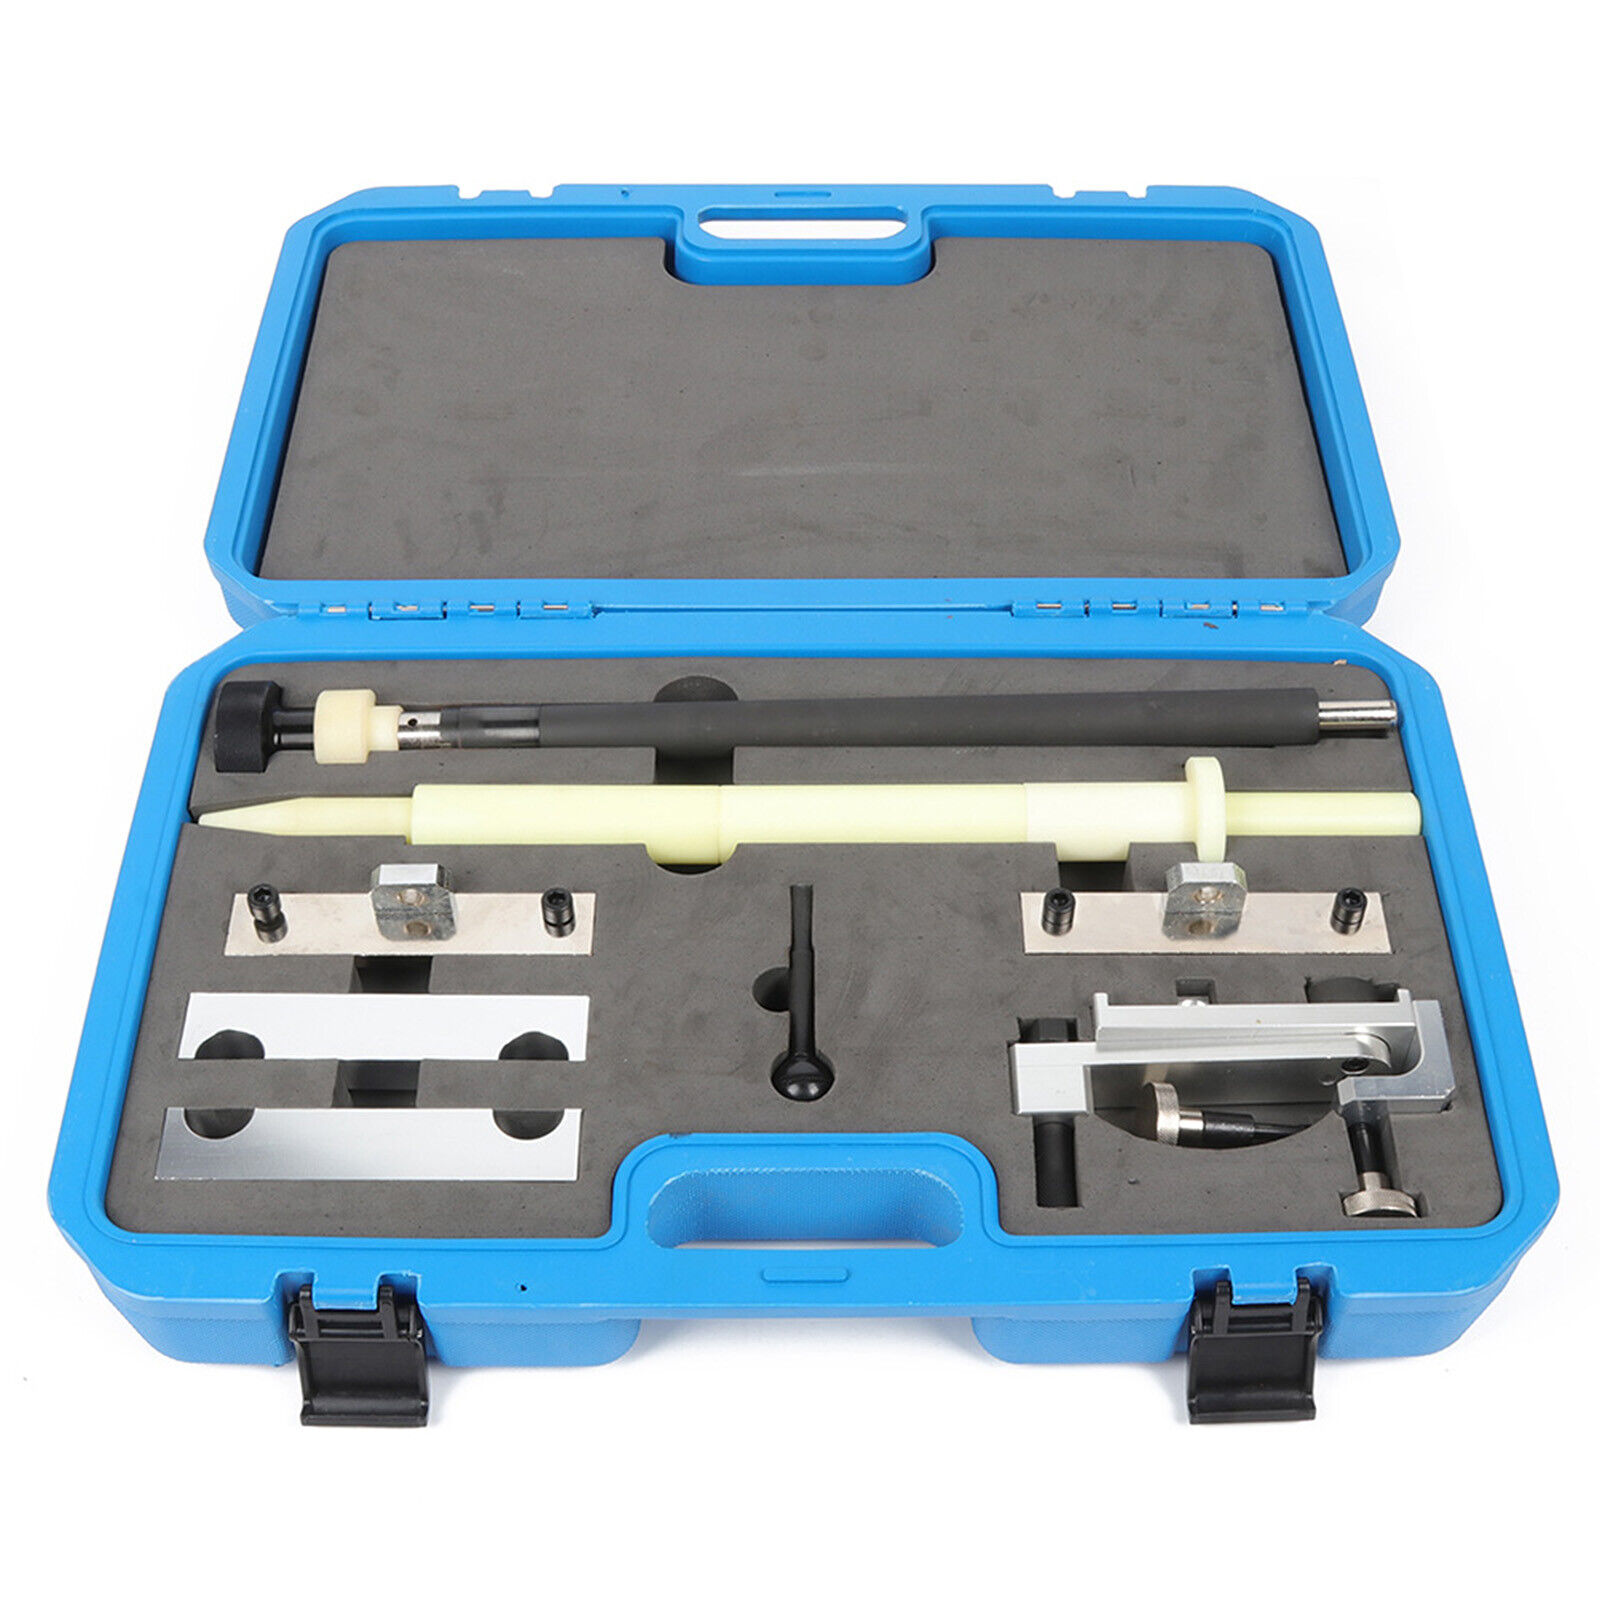 Camshaft Alignment Engine Timing Tool Kit For Porsche 911/Boxster 996 -997- 987